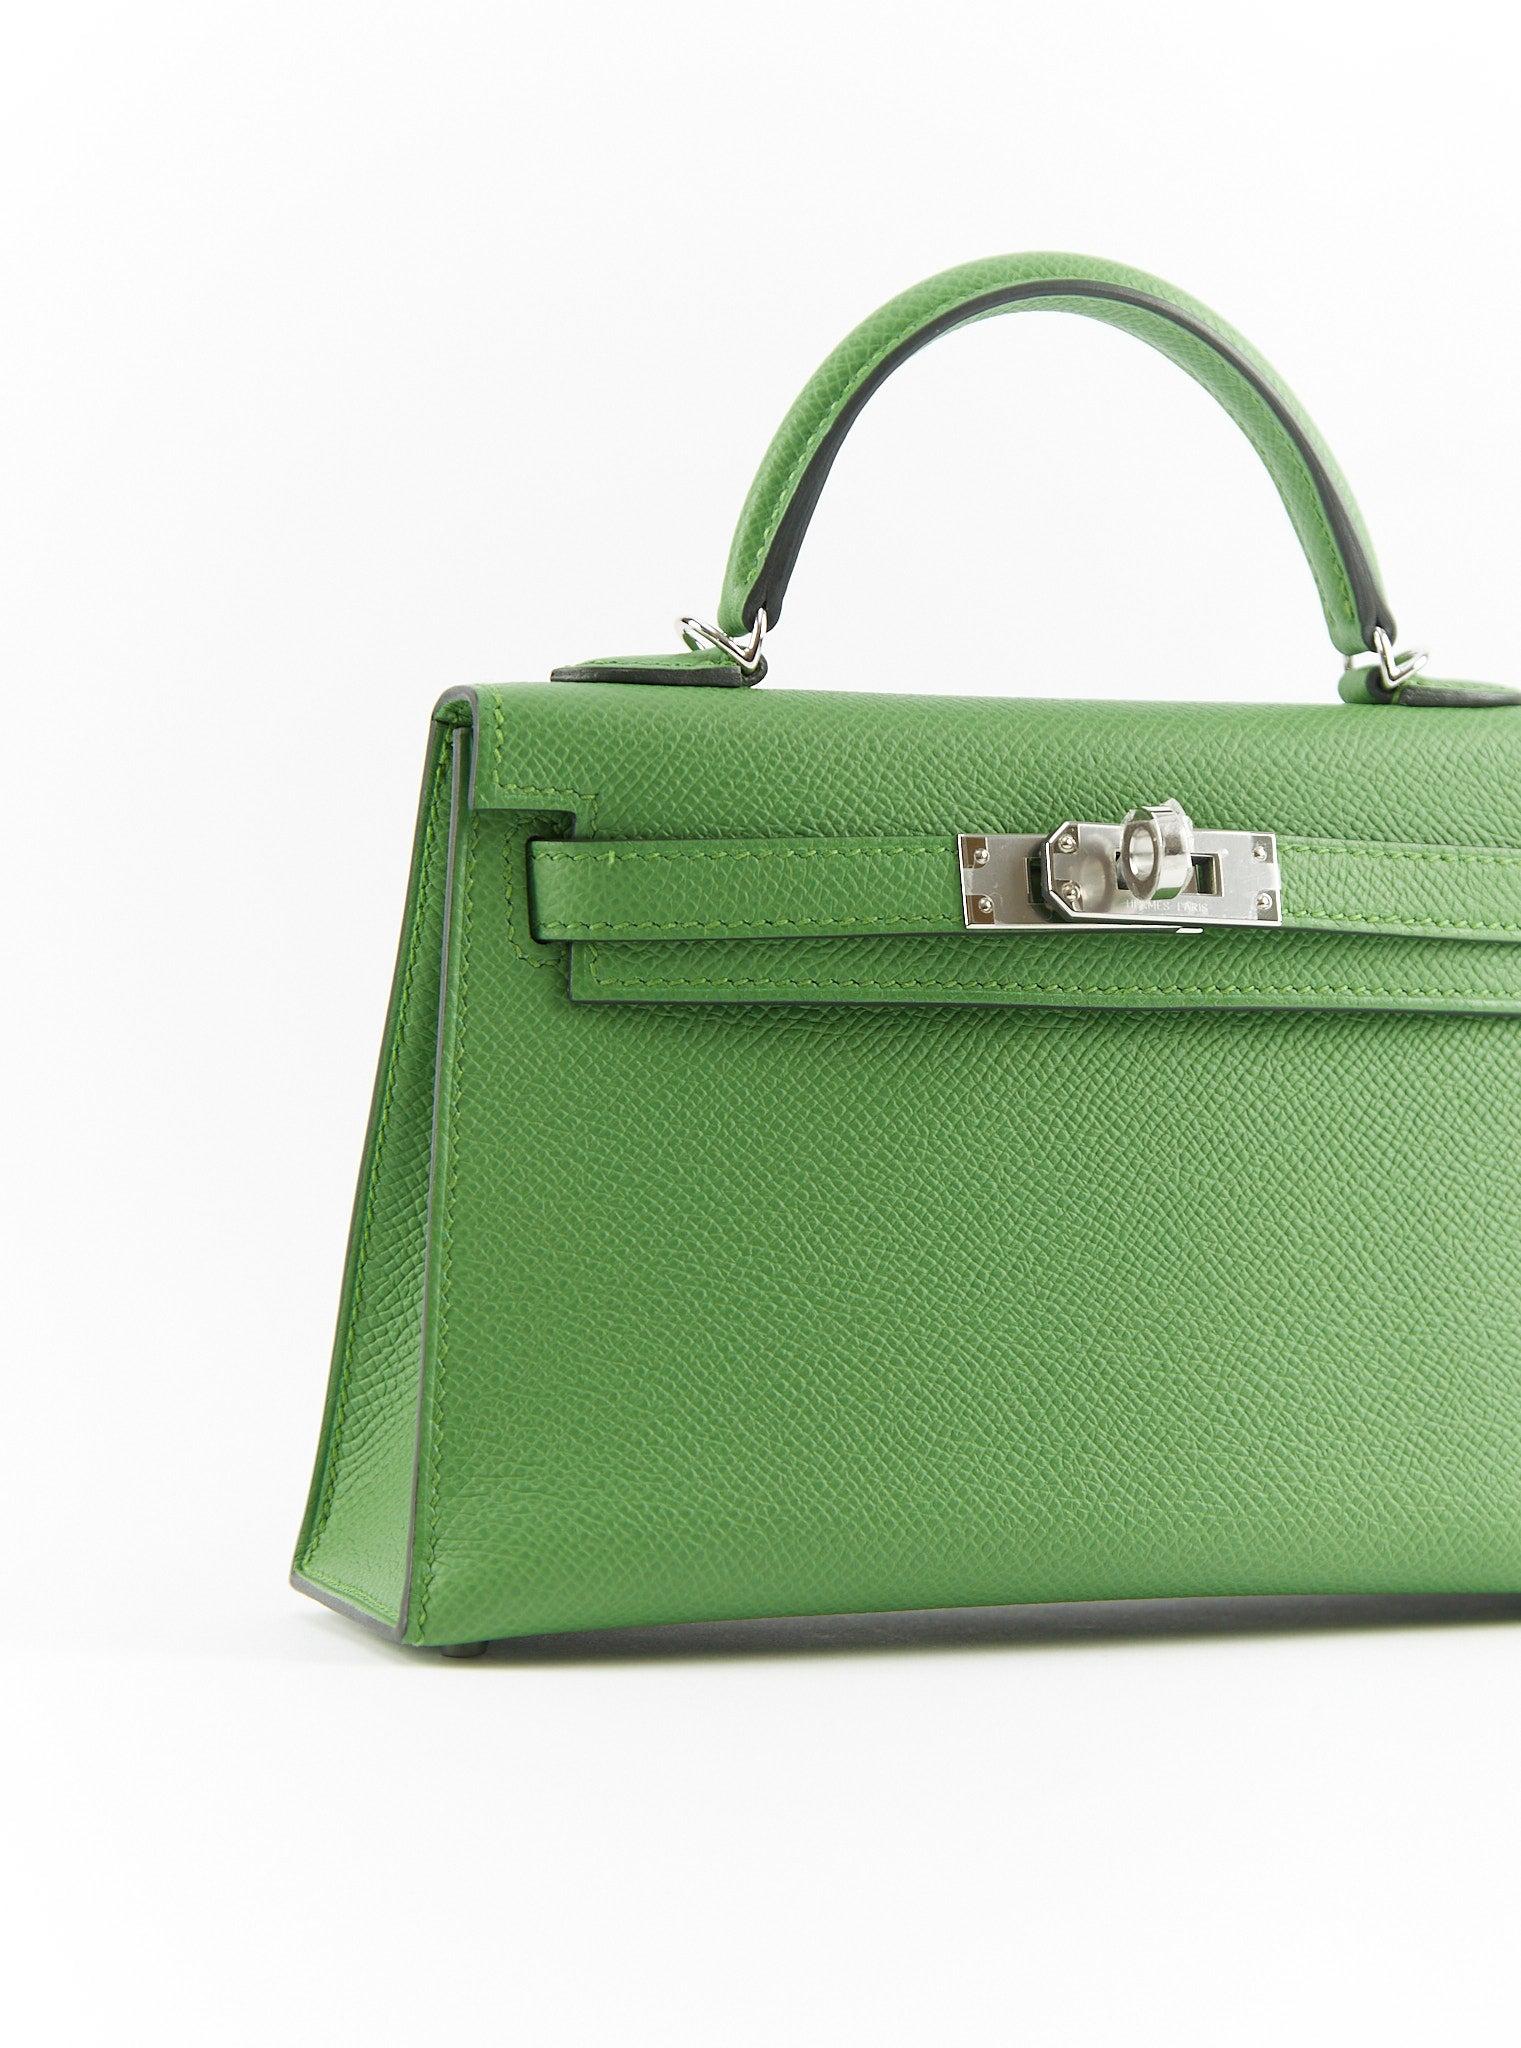 HERMÈS MINI KELLY II 20CM VERT YUCCA Epsom Leather with Palladium Hardware In Excellent Condition For Sale In London, GB